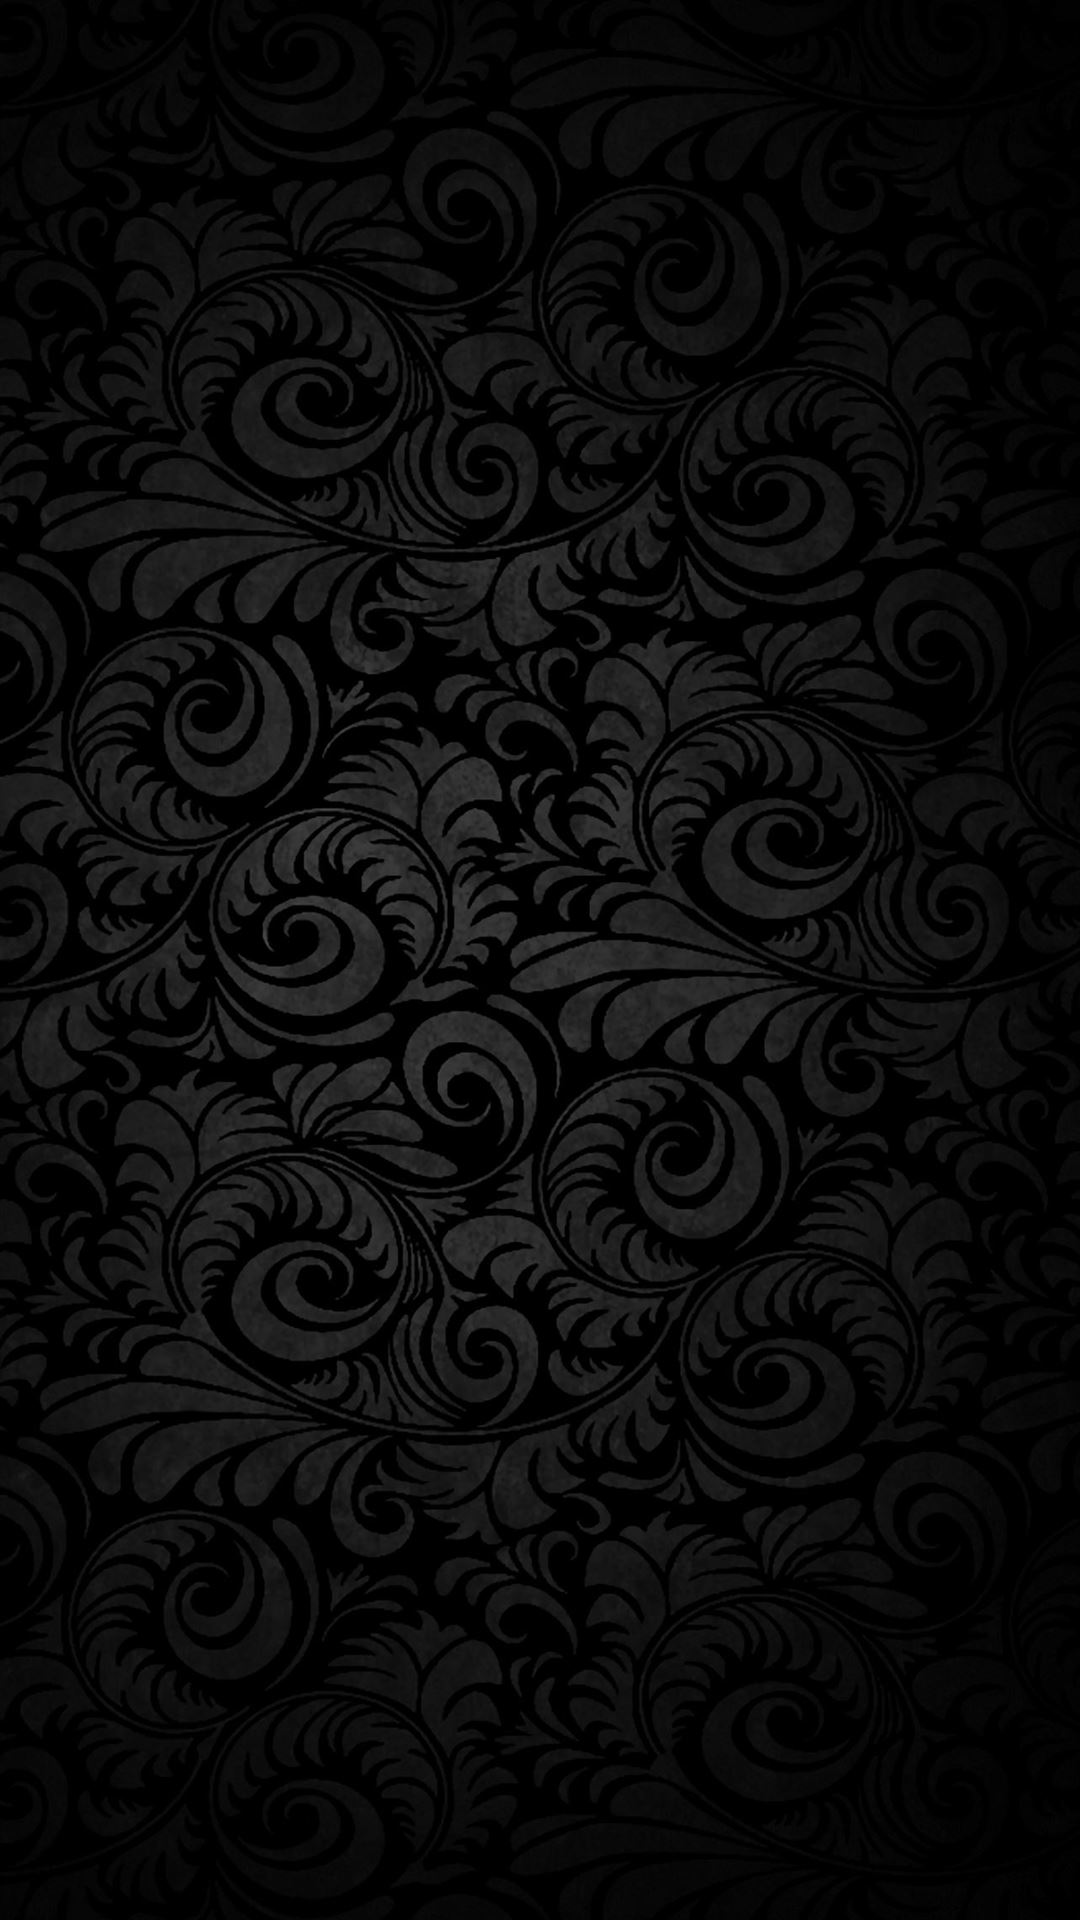 Kate Dark Backgrounds Abstract Texture Backdrops For Photography   Katebackdrop